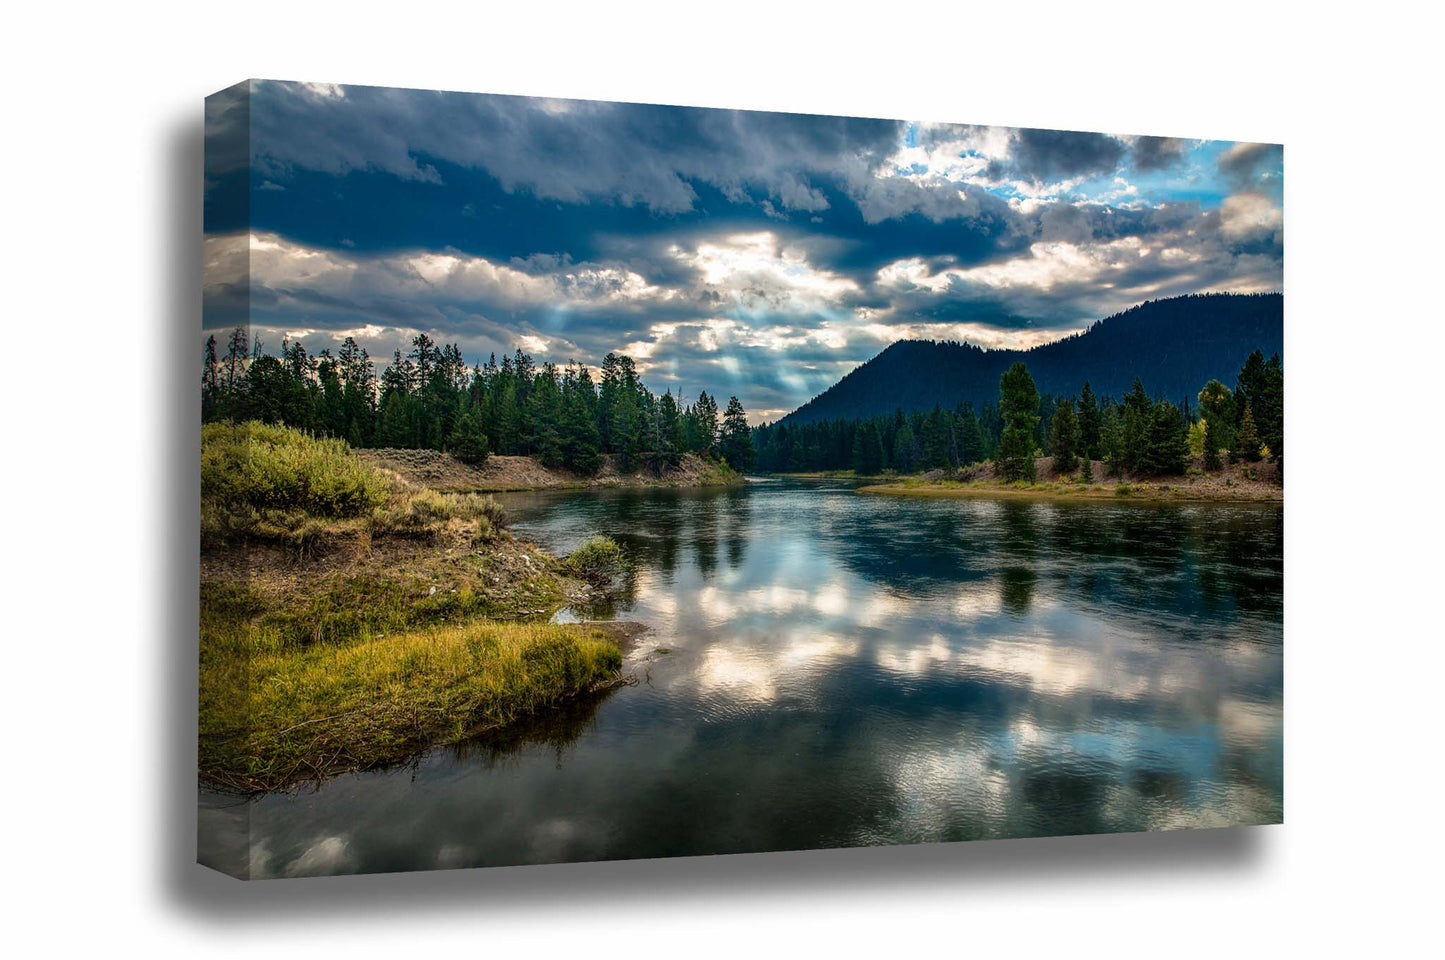 Western canvas wall art of sunlight reflecting off the Snake River on a peaceful morning in Grand Teton National Park, Wyoming by Sean Ramsey of Southern Plains Photography.